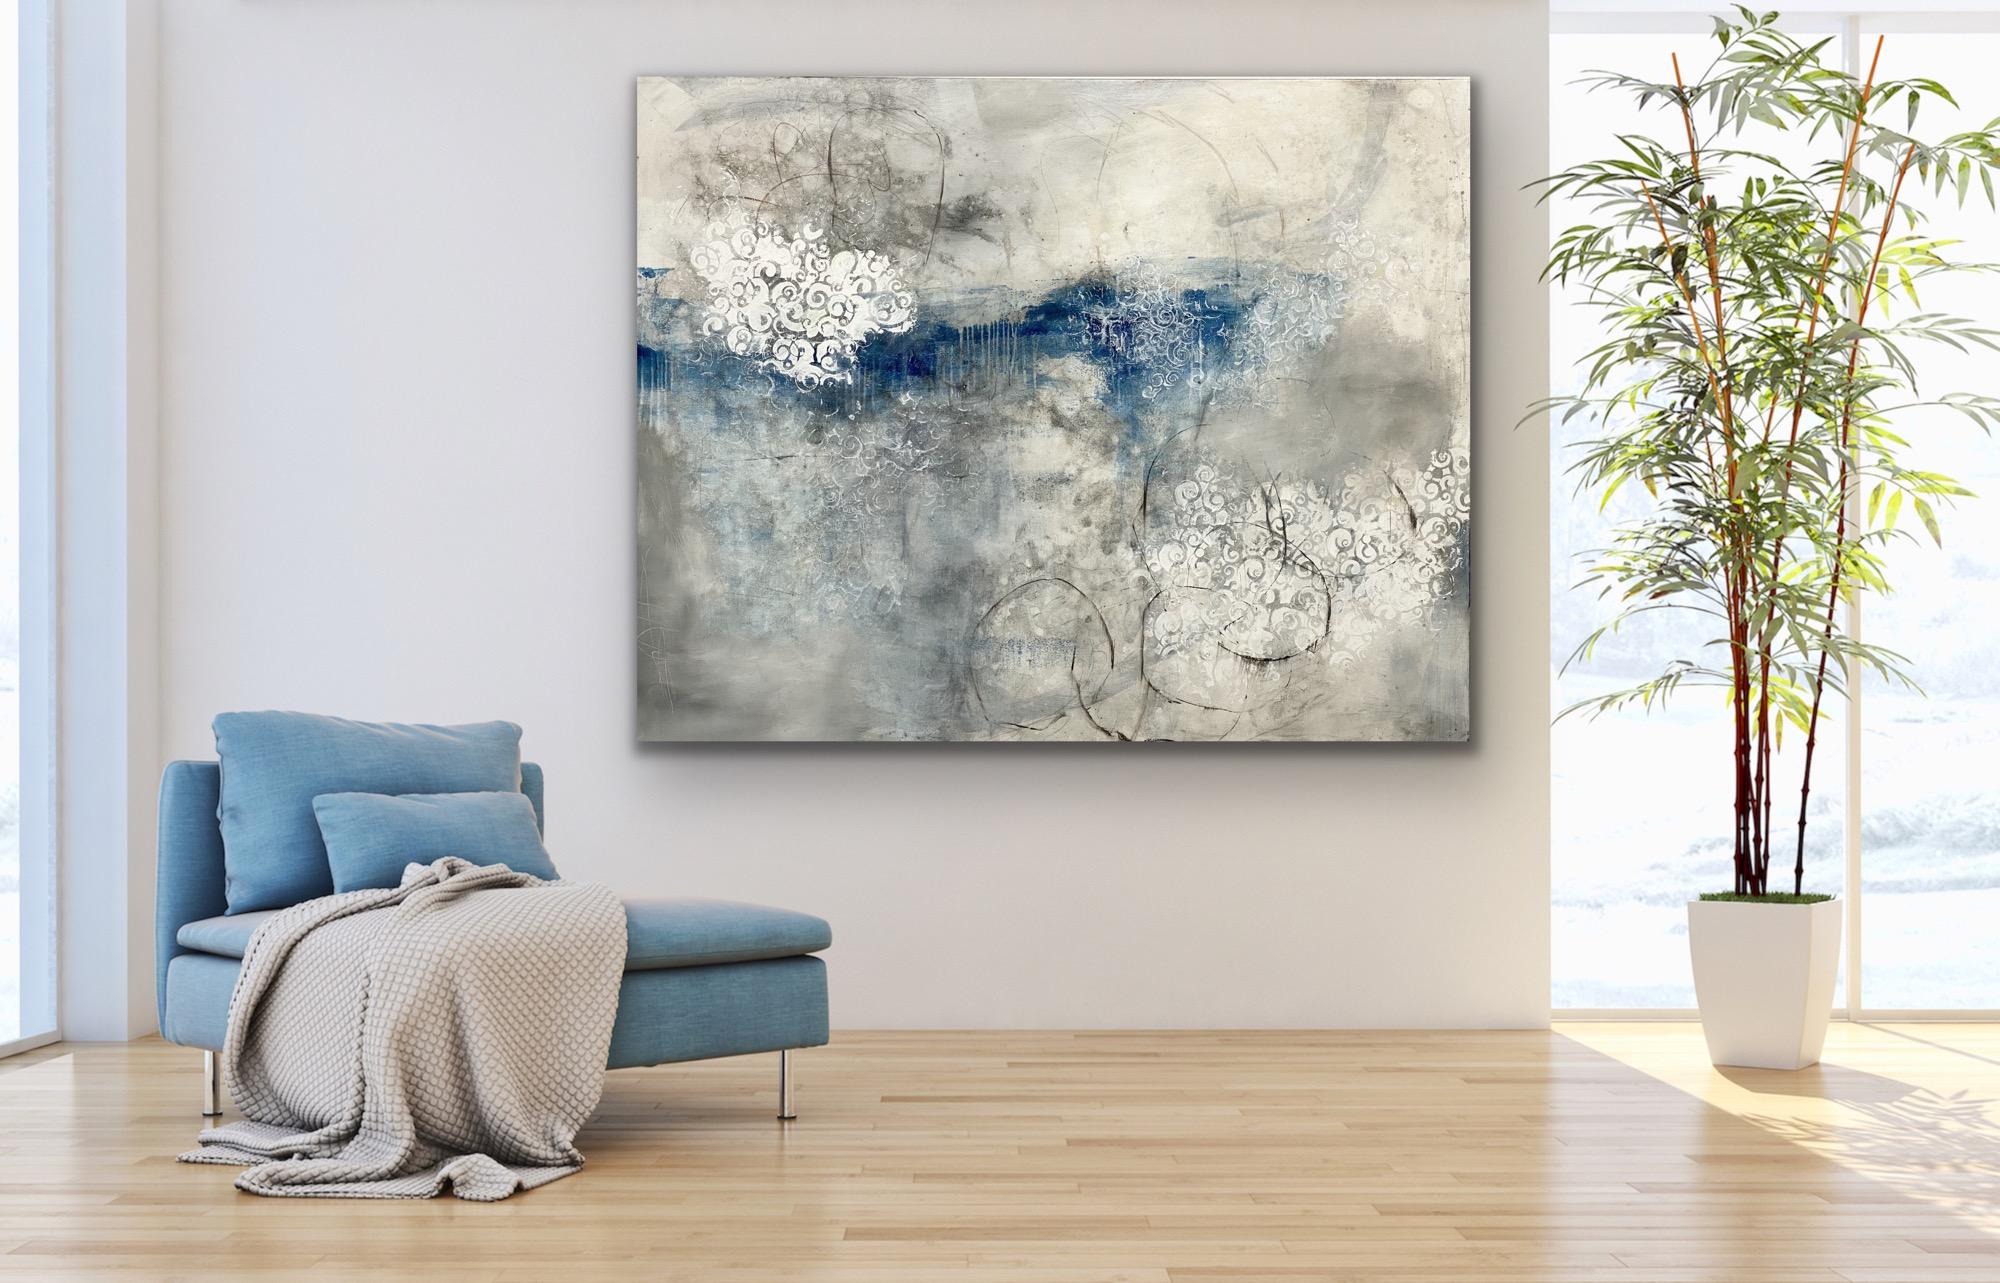 Pool of tranquility,  Contemporary seascape, blue, ocean, 2020, Acrylic on canva - Gray Landscape Painting by Juanita Bellavance 